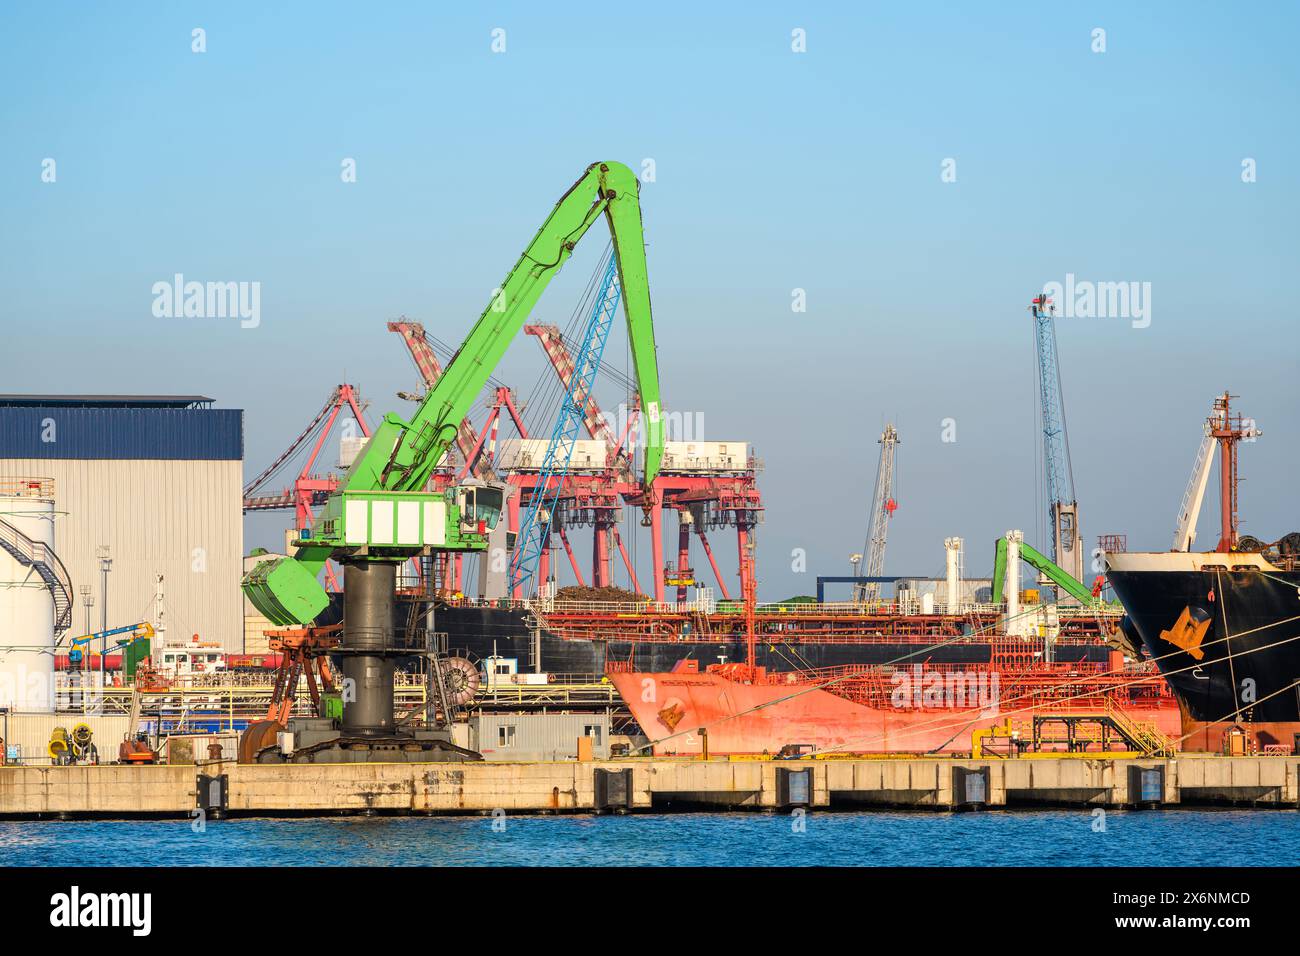 Loading onto bulk carrier ship at commercial port on a sunny day Stock Photo